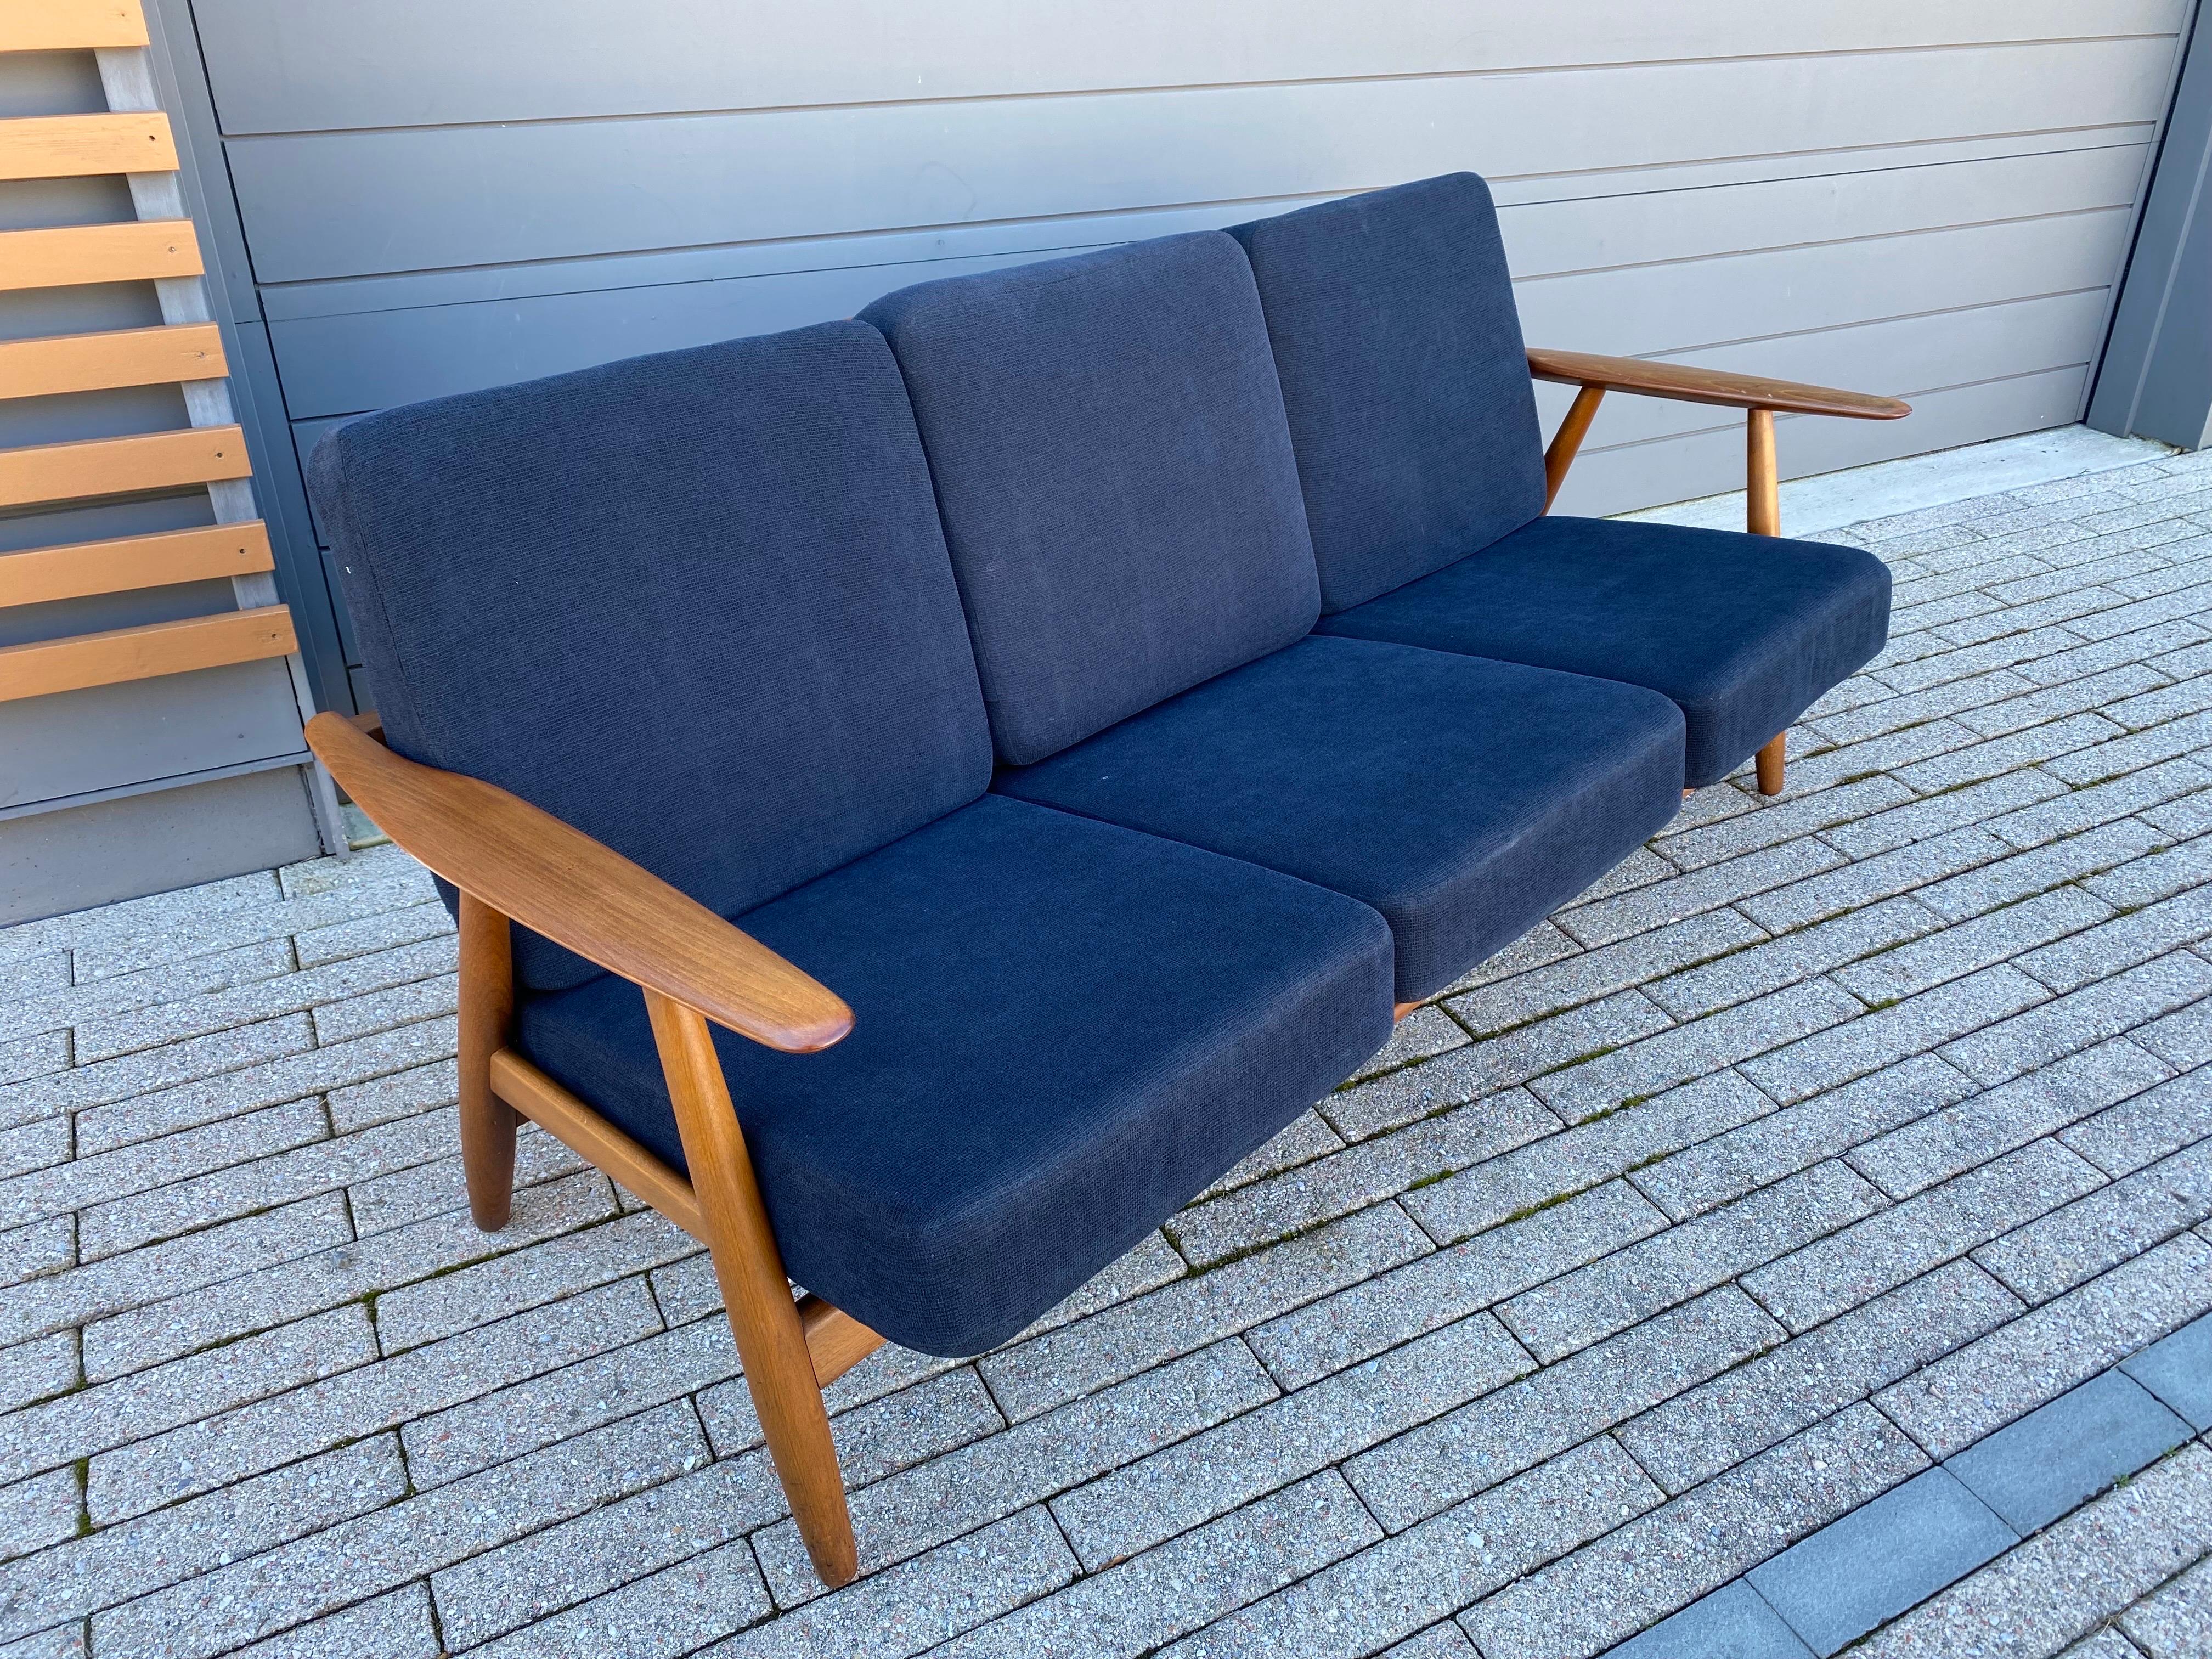 Hans Wegner for GETAMA GE-240 3 seat sofa. Oak body with teak arms. Redone about 13 years ago but retaining it's original inner coil springs.  Looks like arms were refinished at some point.  Really great Scale! This 3 seater measures just 68